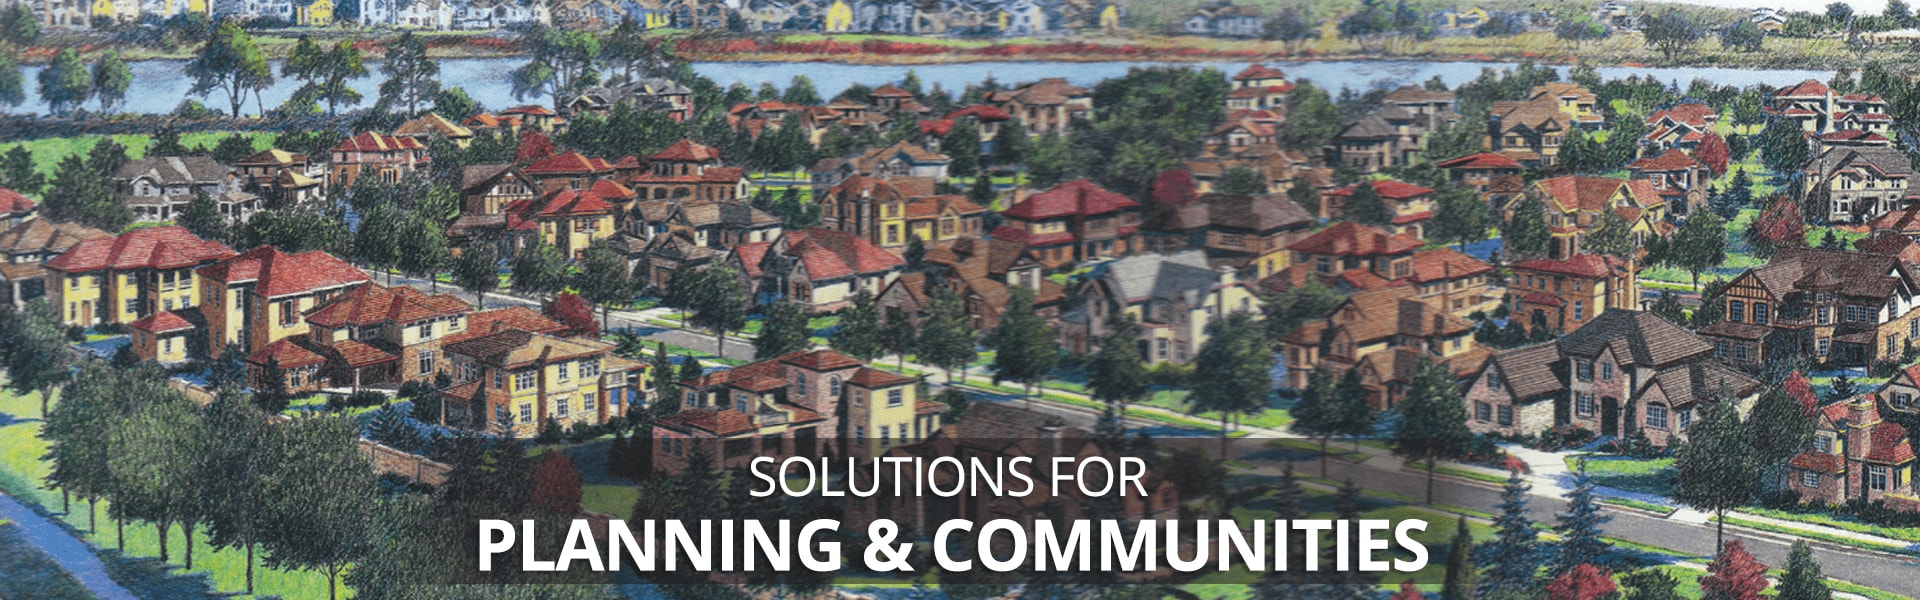 Architects that specialize in Planning & Communities in Colorado